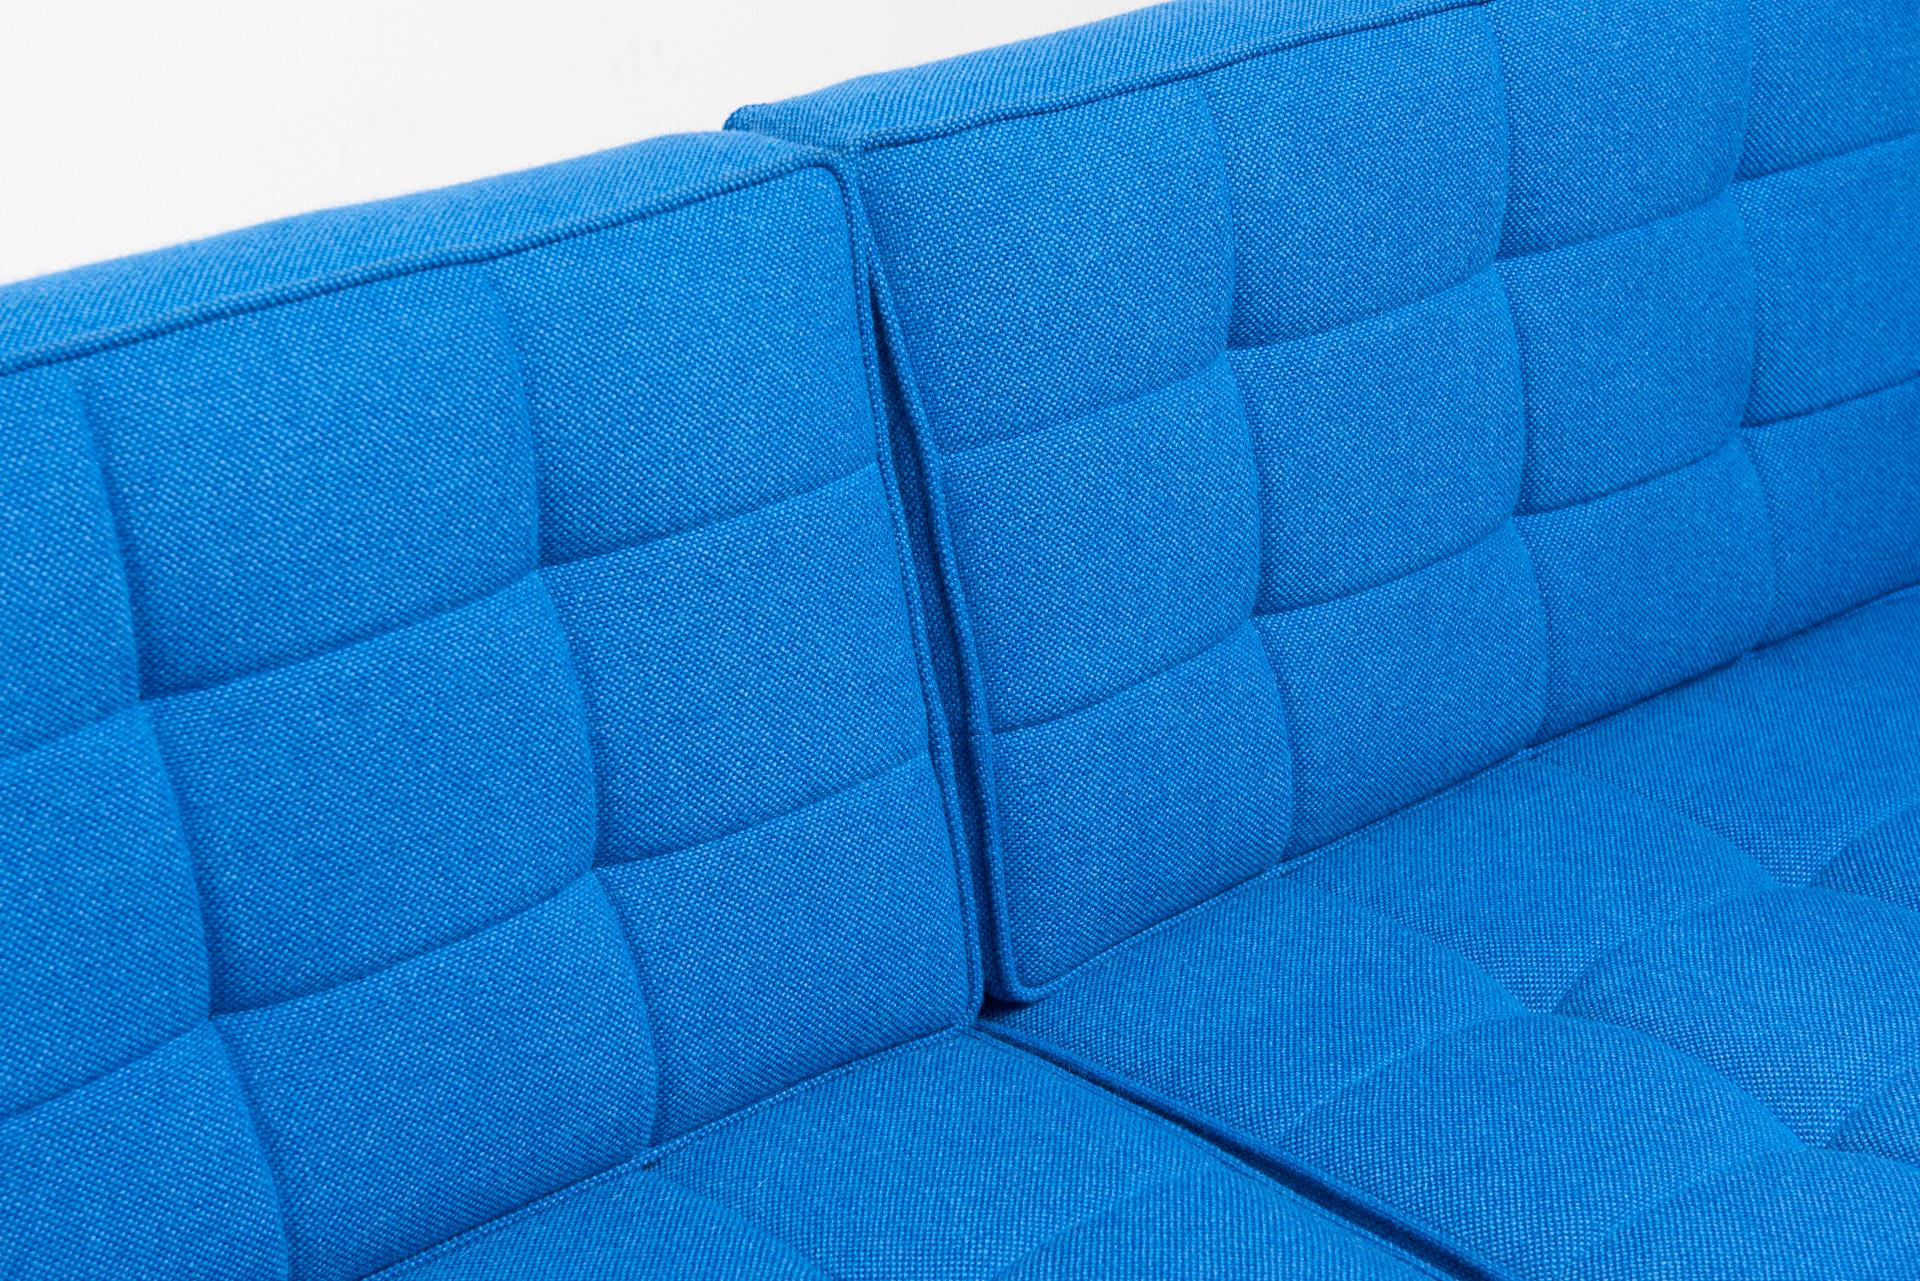 American Clear Blue 3 Seat Sofa by Florence Knoll, 1954